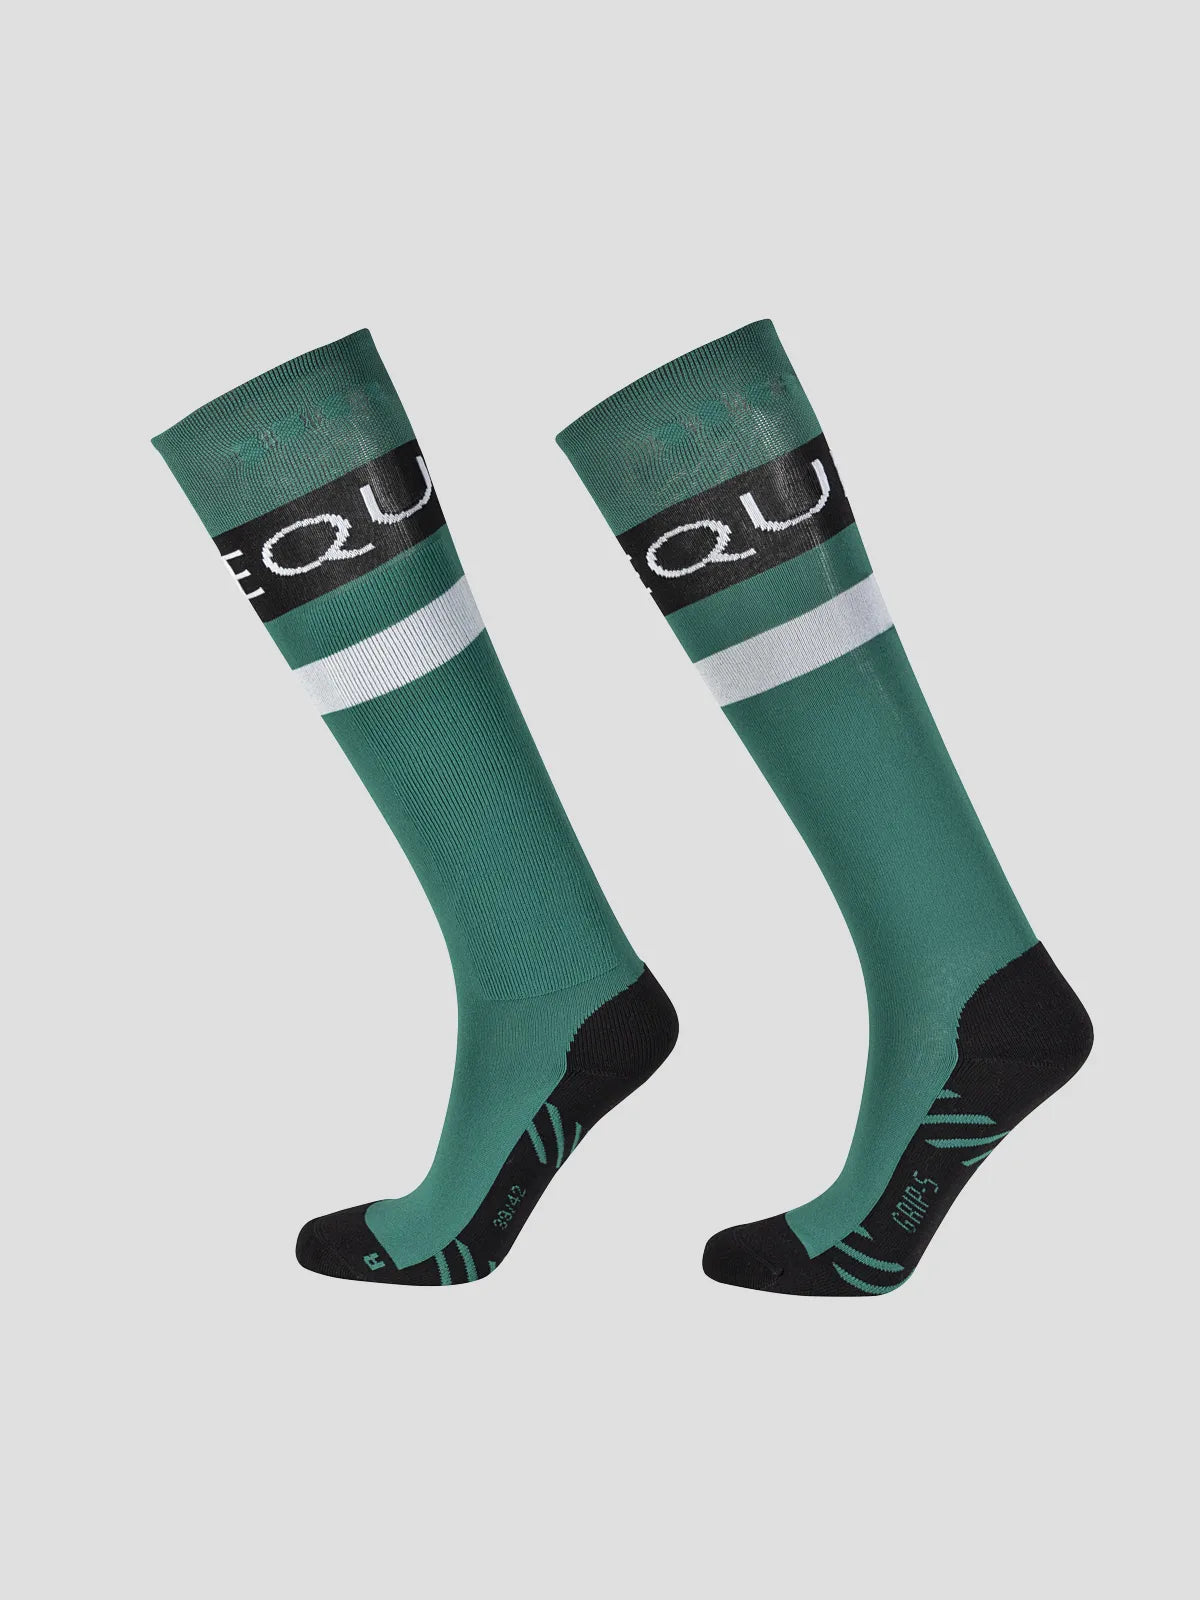 Chaussettes Equiline "Clibec" - Pepper Green